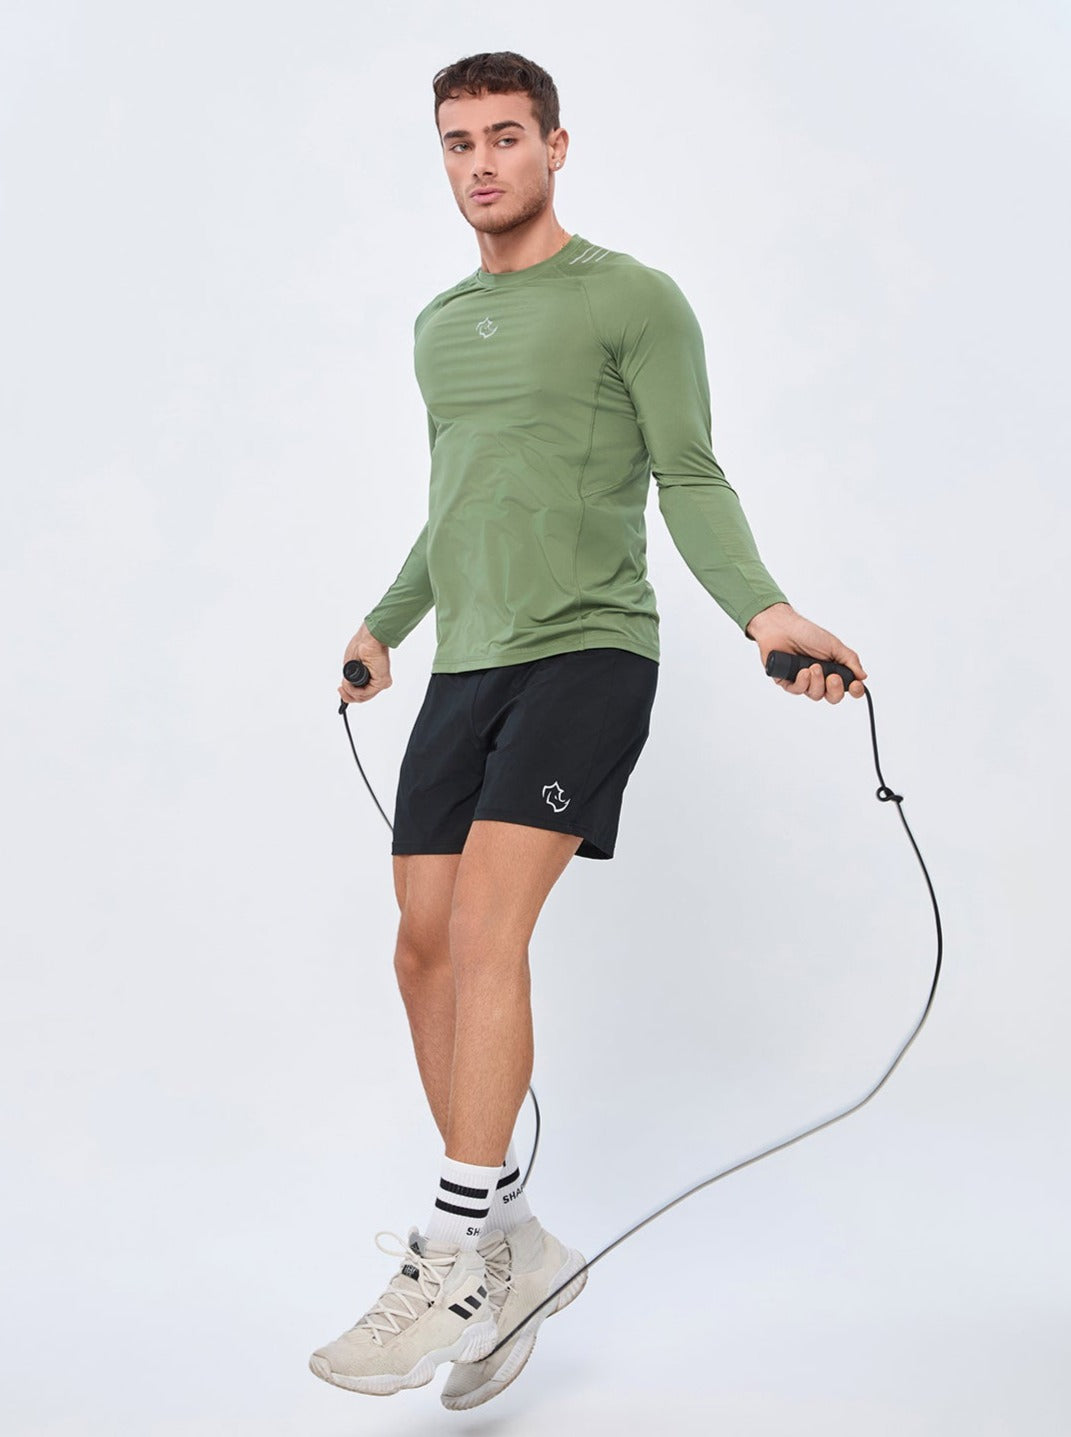 COMPRESSION FIT Long Sleeve CORE LONG SLEEVE - SAGE GREEN